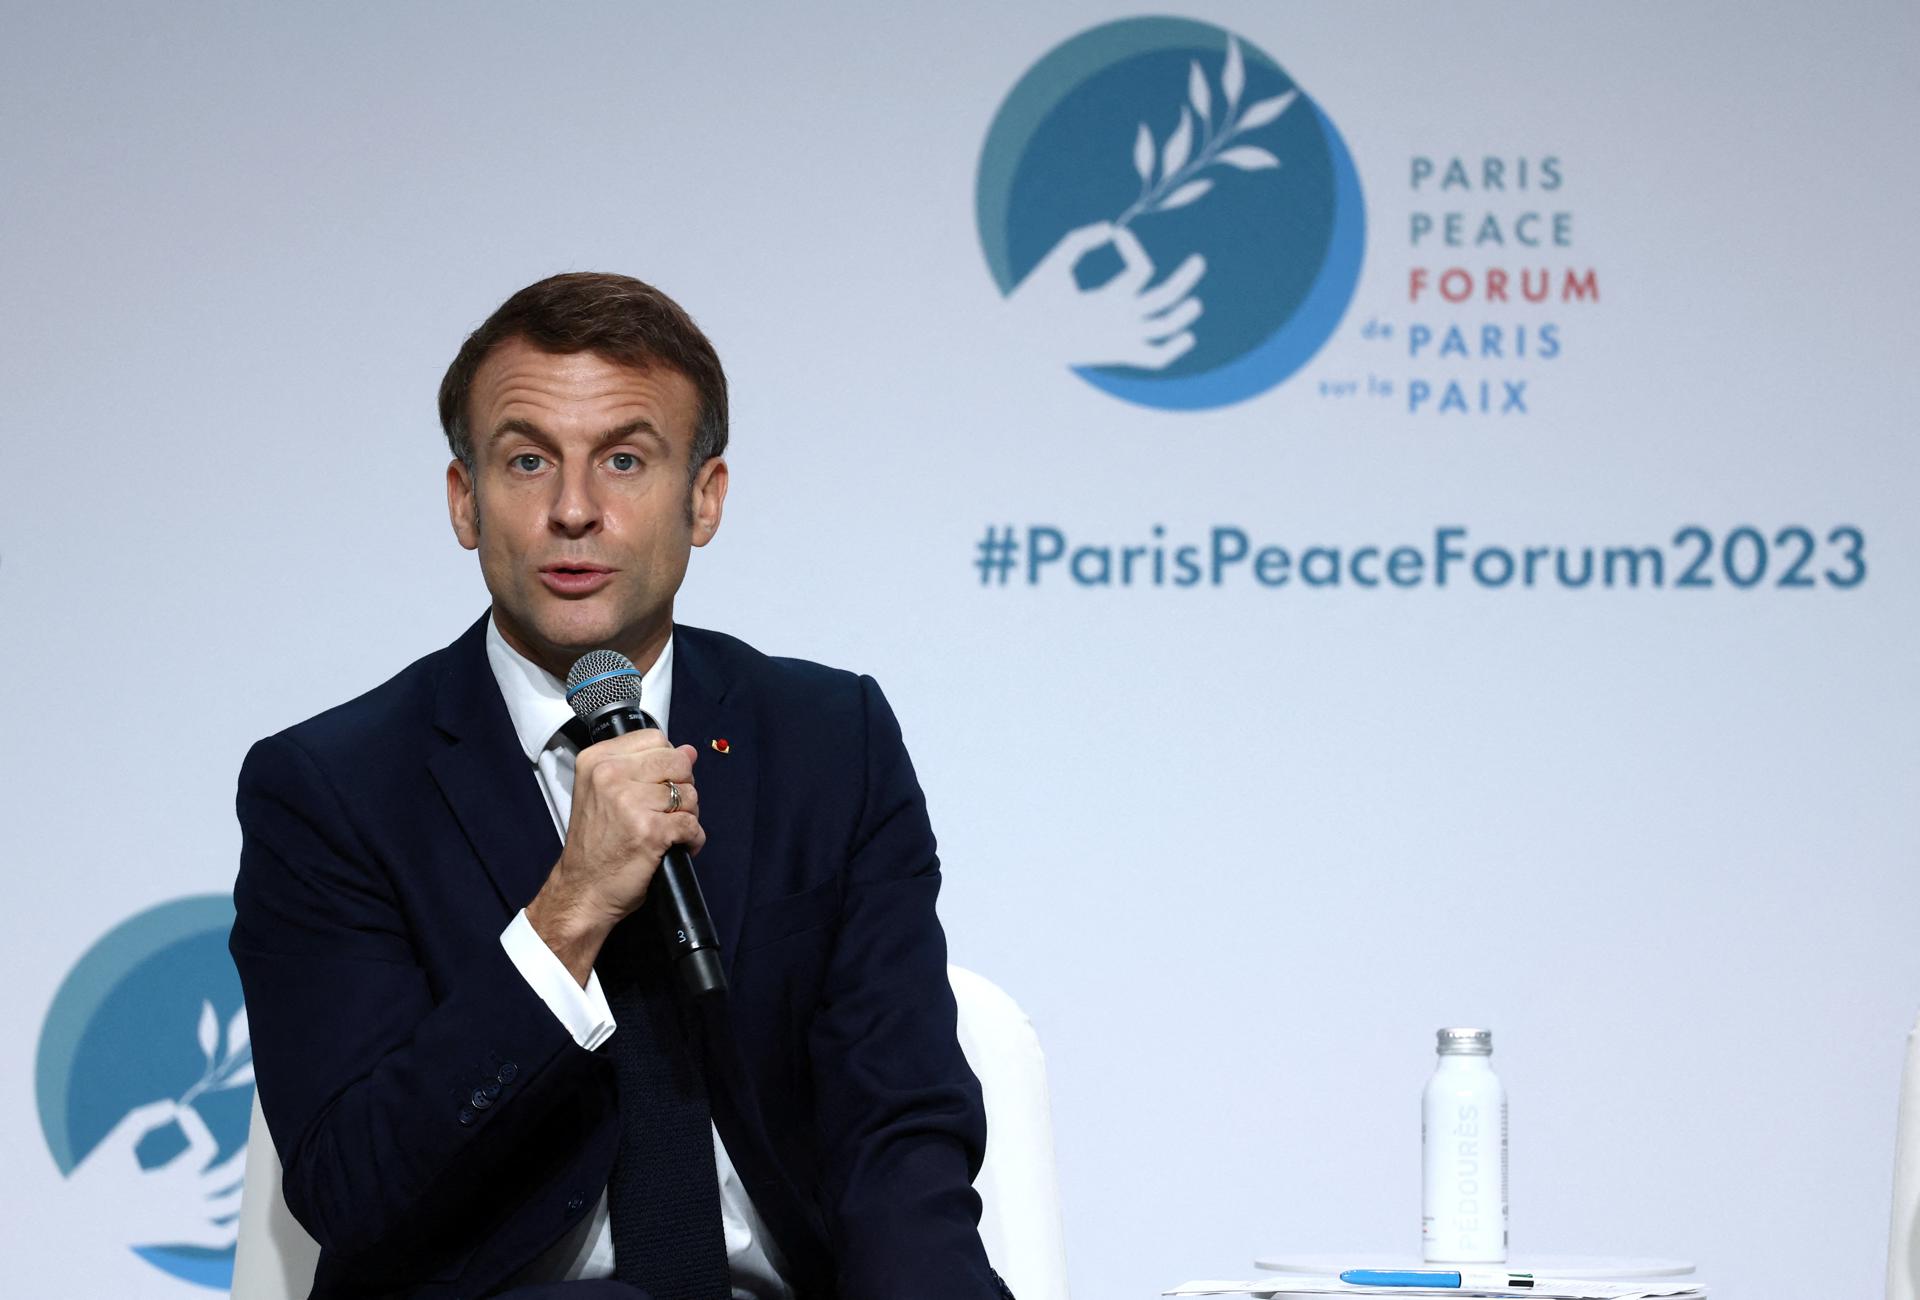 Paris (France), 10/11/2023.- French President Emmanuel Macron delivers a speech during the opening ceremony of the 6th edition of the Paris Peace Forum at the Palais Brongniart in Paris, France, 10 November 2023. The annual Paris Peace Forum brings together governments, businesses, NGOs and others seeking dialogue to find solutions for global challenges. This year's theme is 'Seeking Common Ground in a World of Rivalry'. (Francia) EFE/EPA/STEPHANIE LECOCQ / POOL MAXPPP OUT